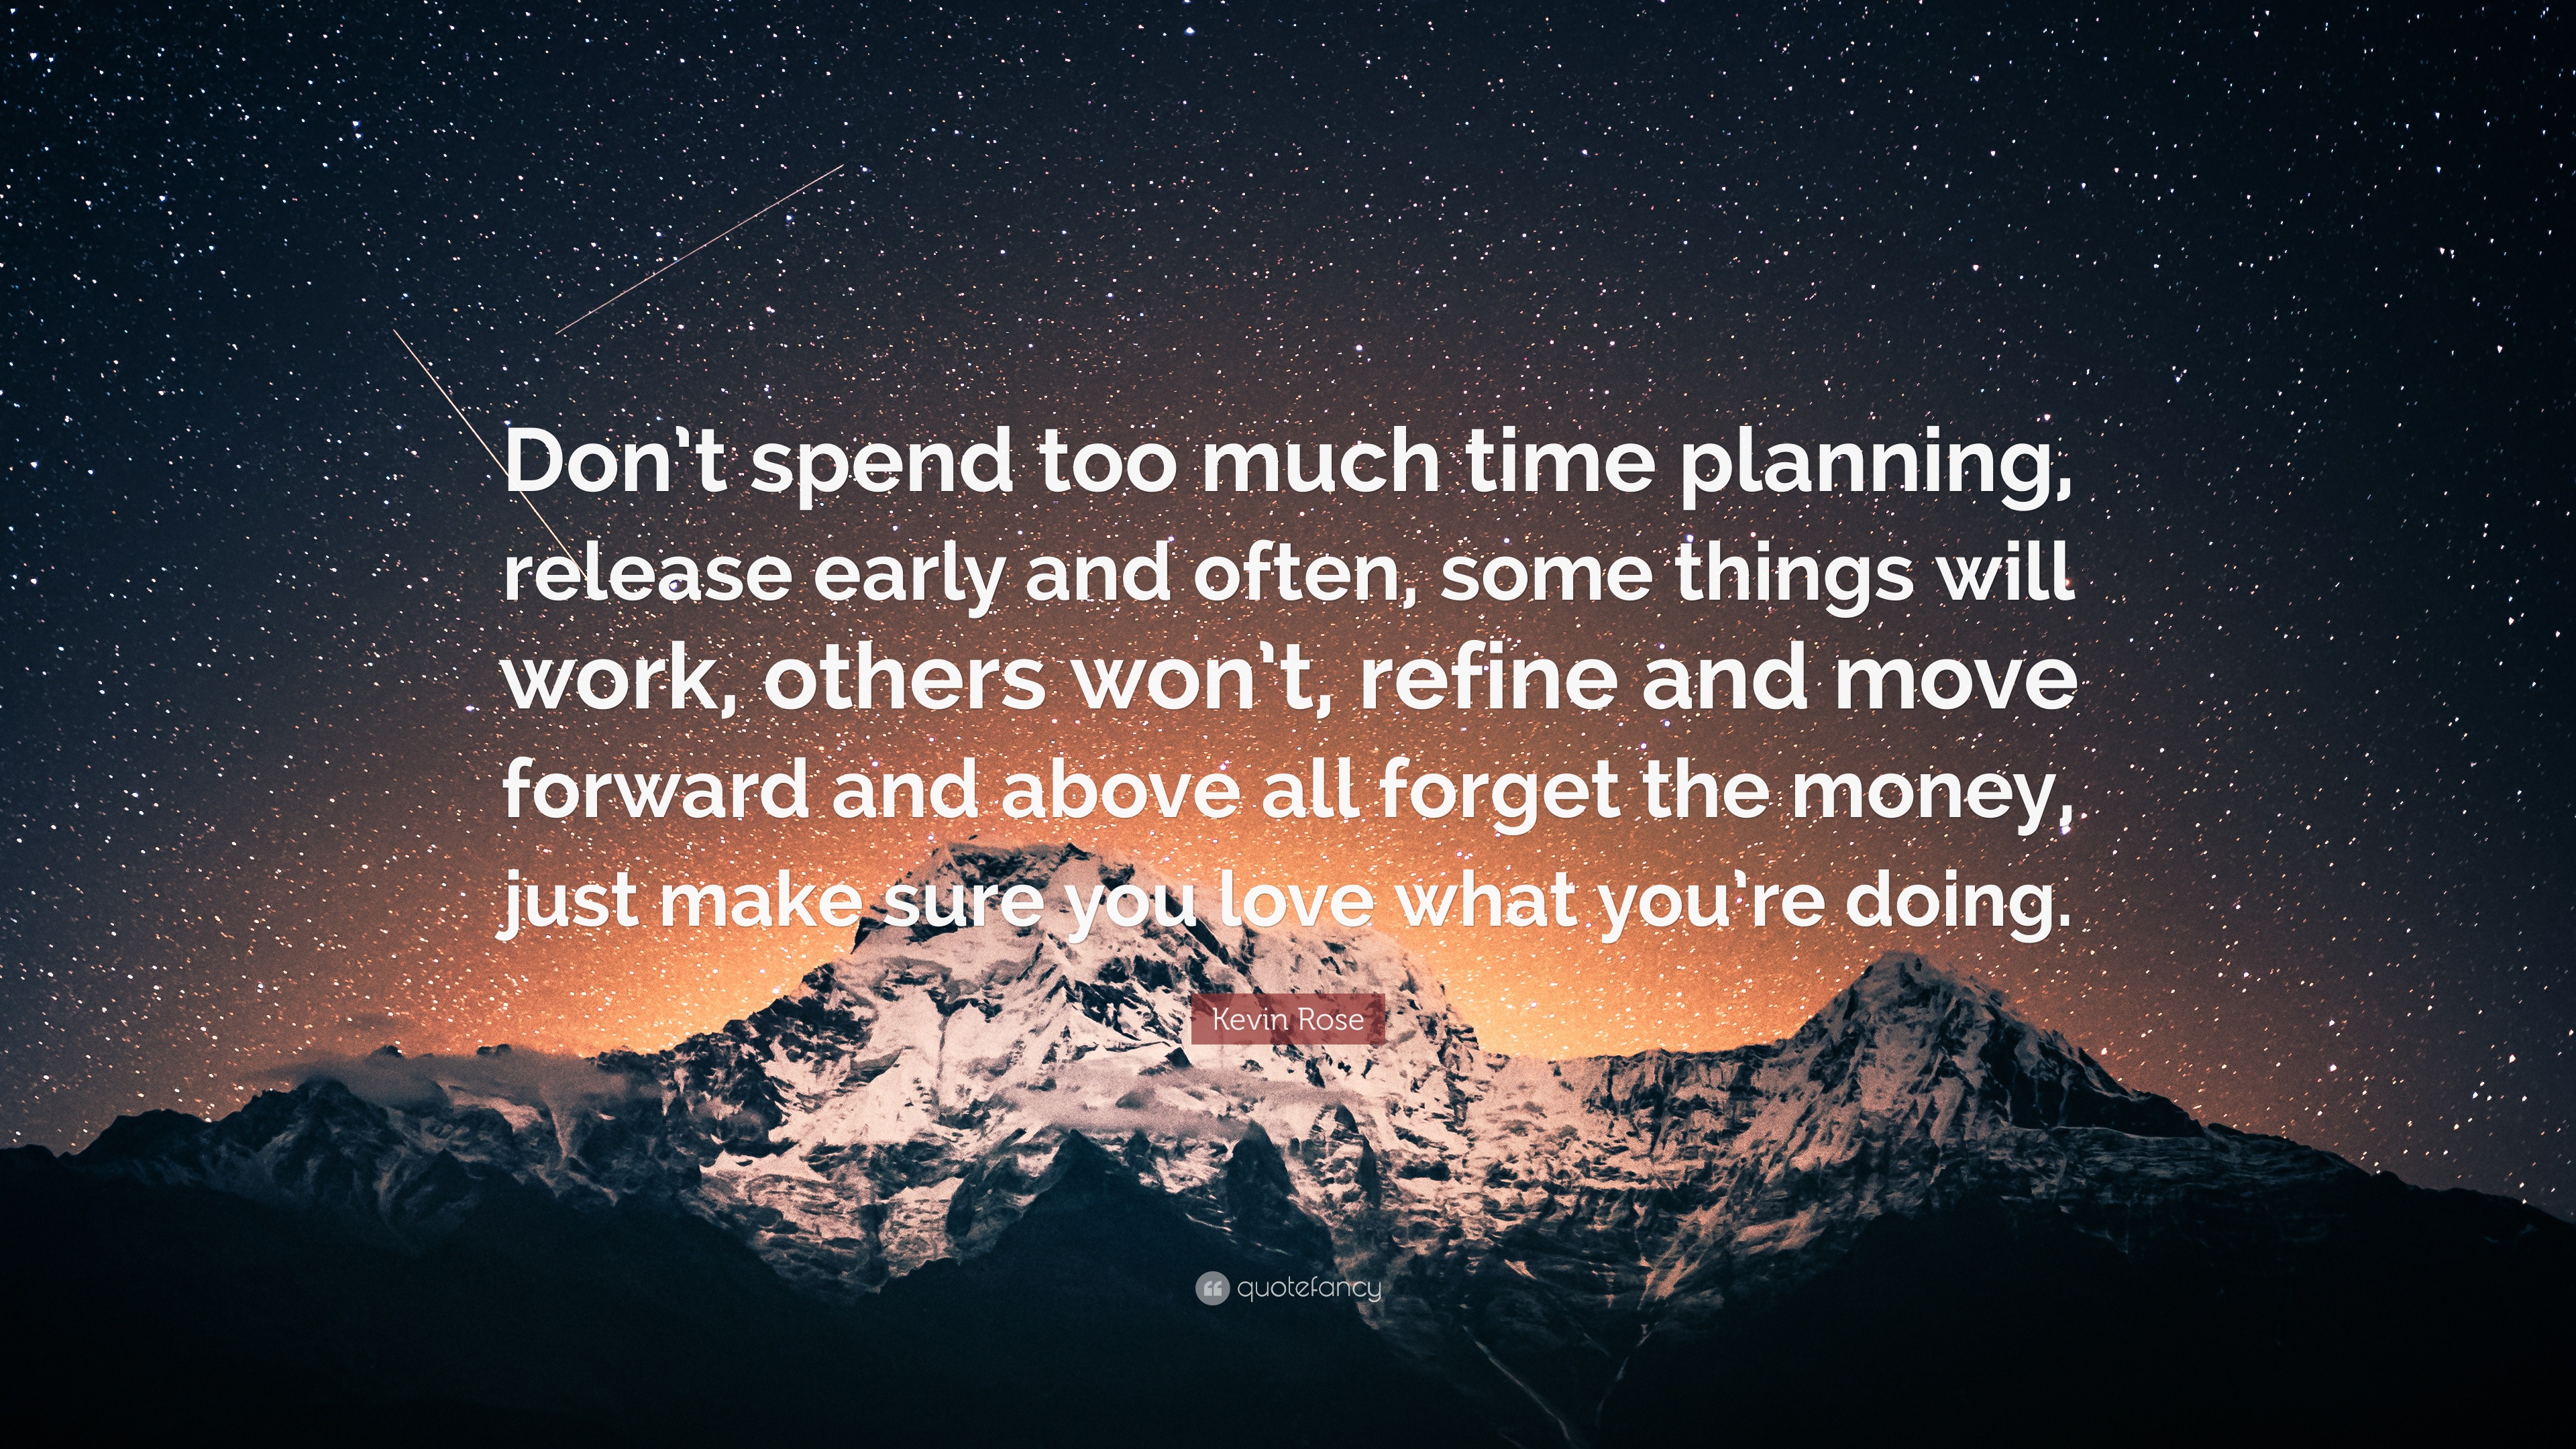 Kevin Rose Quote: “Don't spend too much time planning, early and some things will work, others won't, refine and move forwar...”